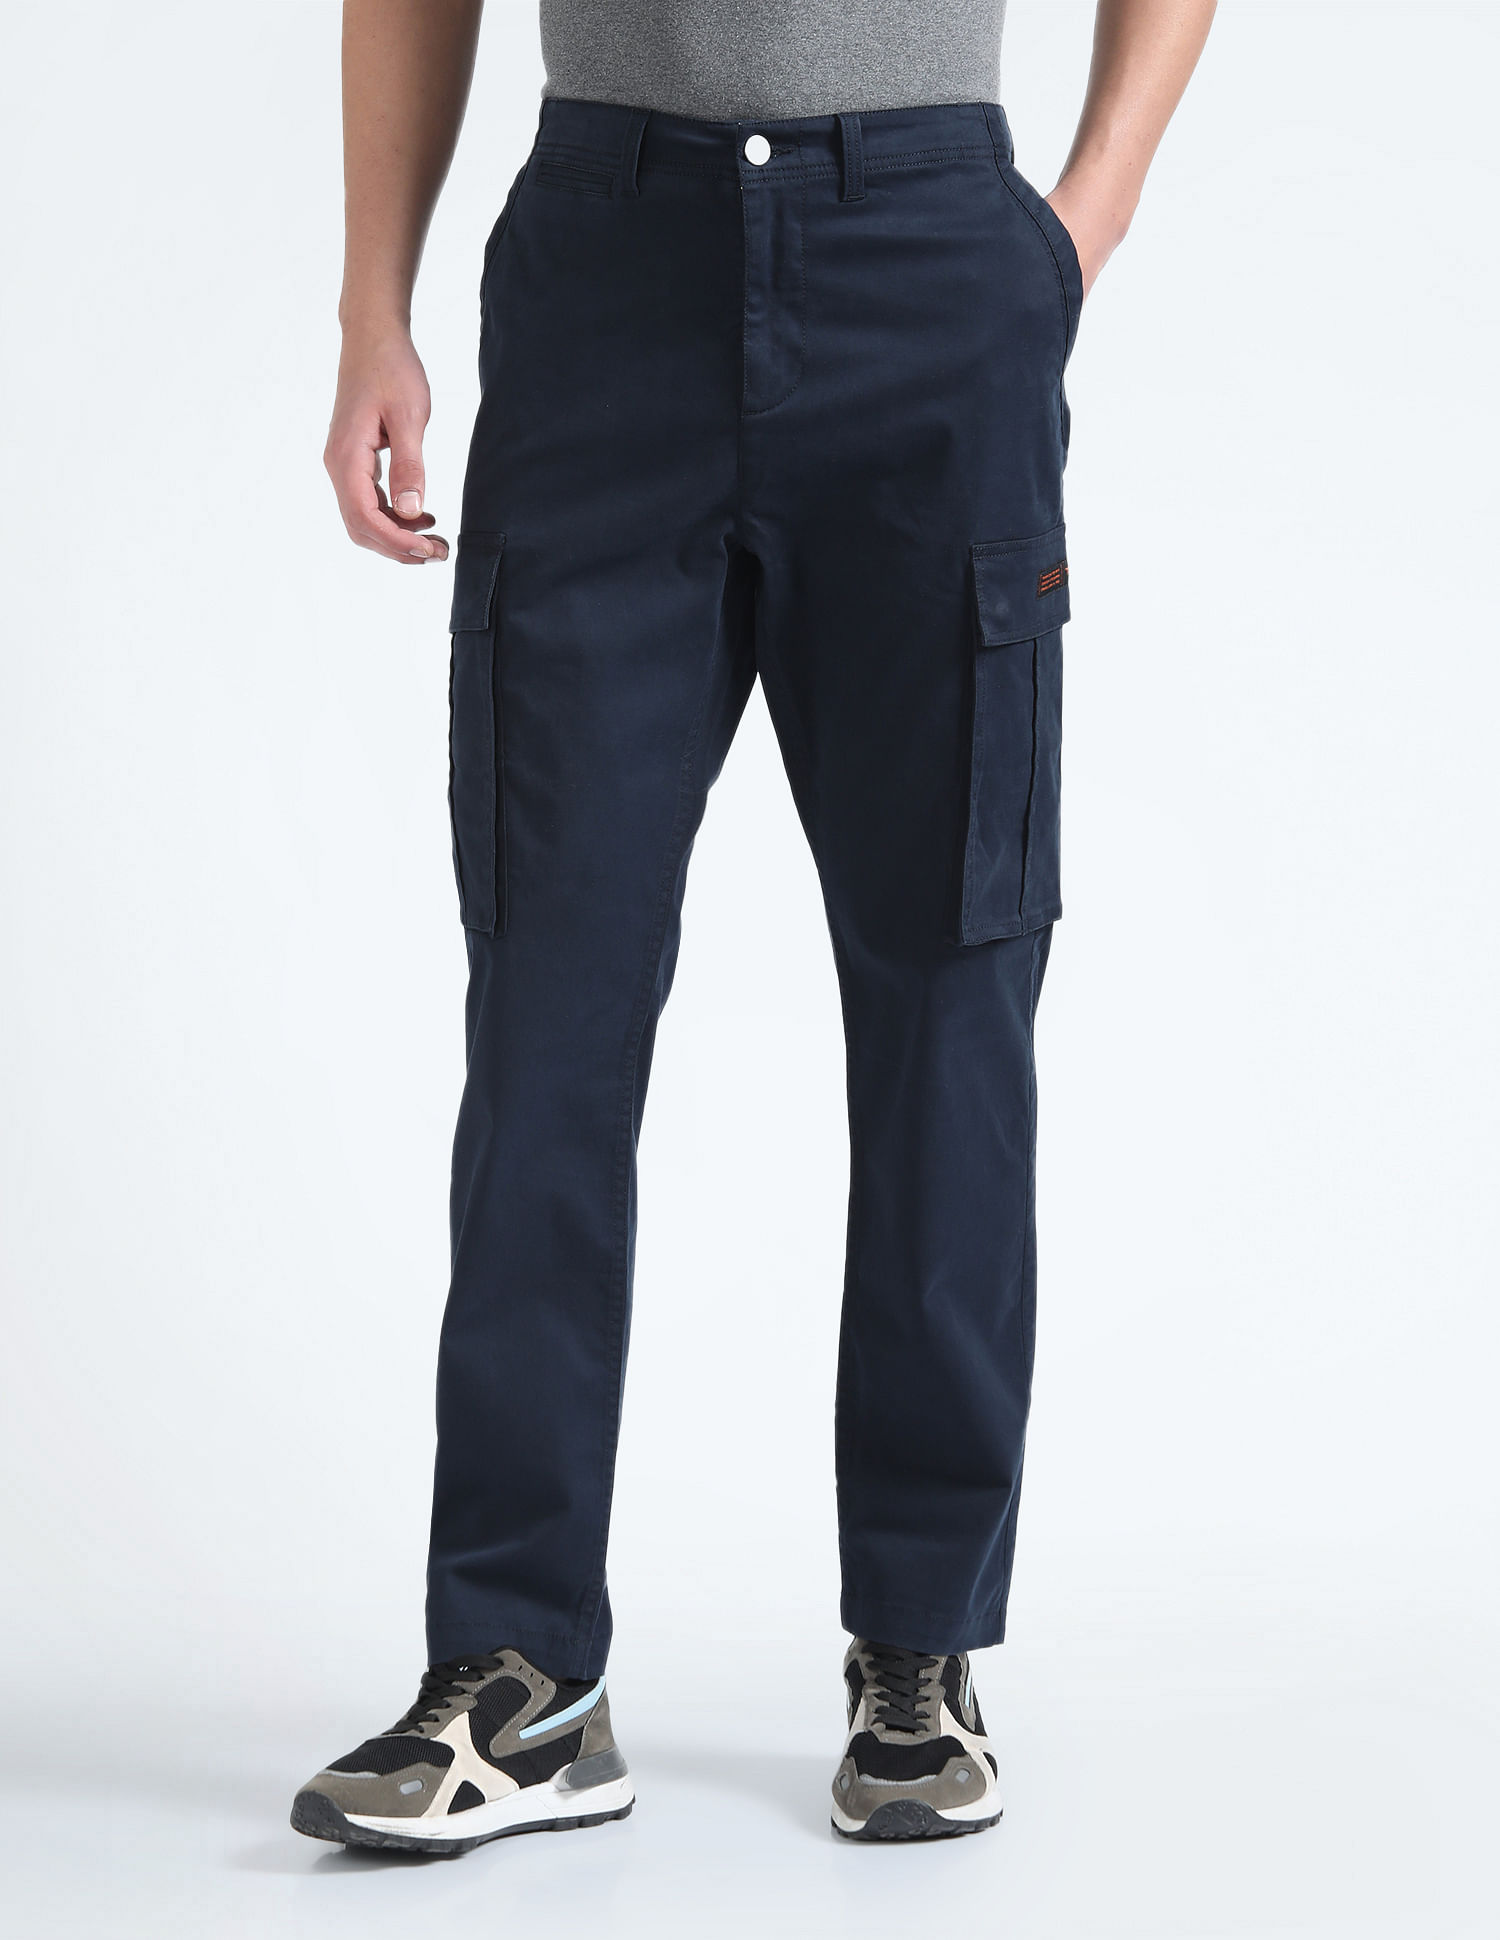 Mens Y2K Flying Machine Cargo Pants With Harajuku Hip Hop Print, Multi  Pocket Overalls, Wide Leg, And Oversized Streetwear Fs88 P7 2023 From  Rhudeshopping, $24.17 | DHgate.Com